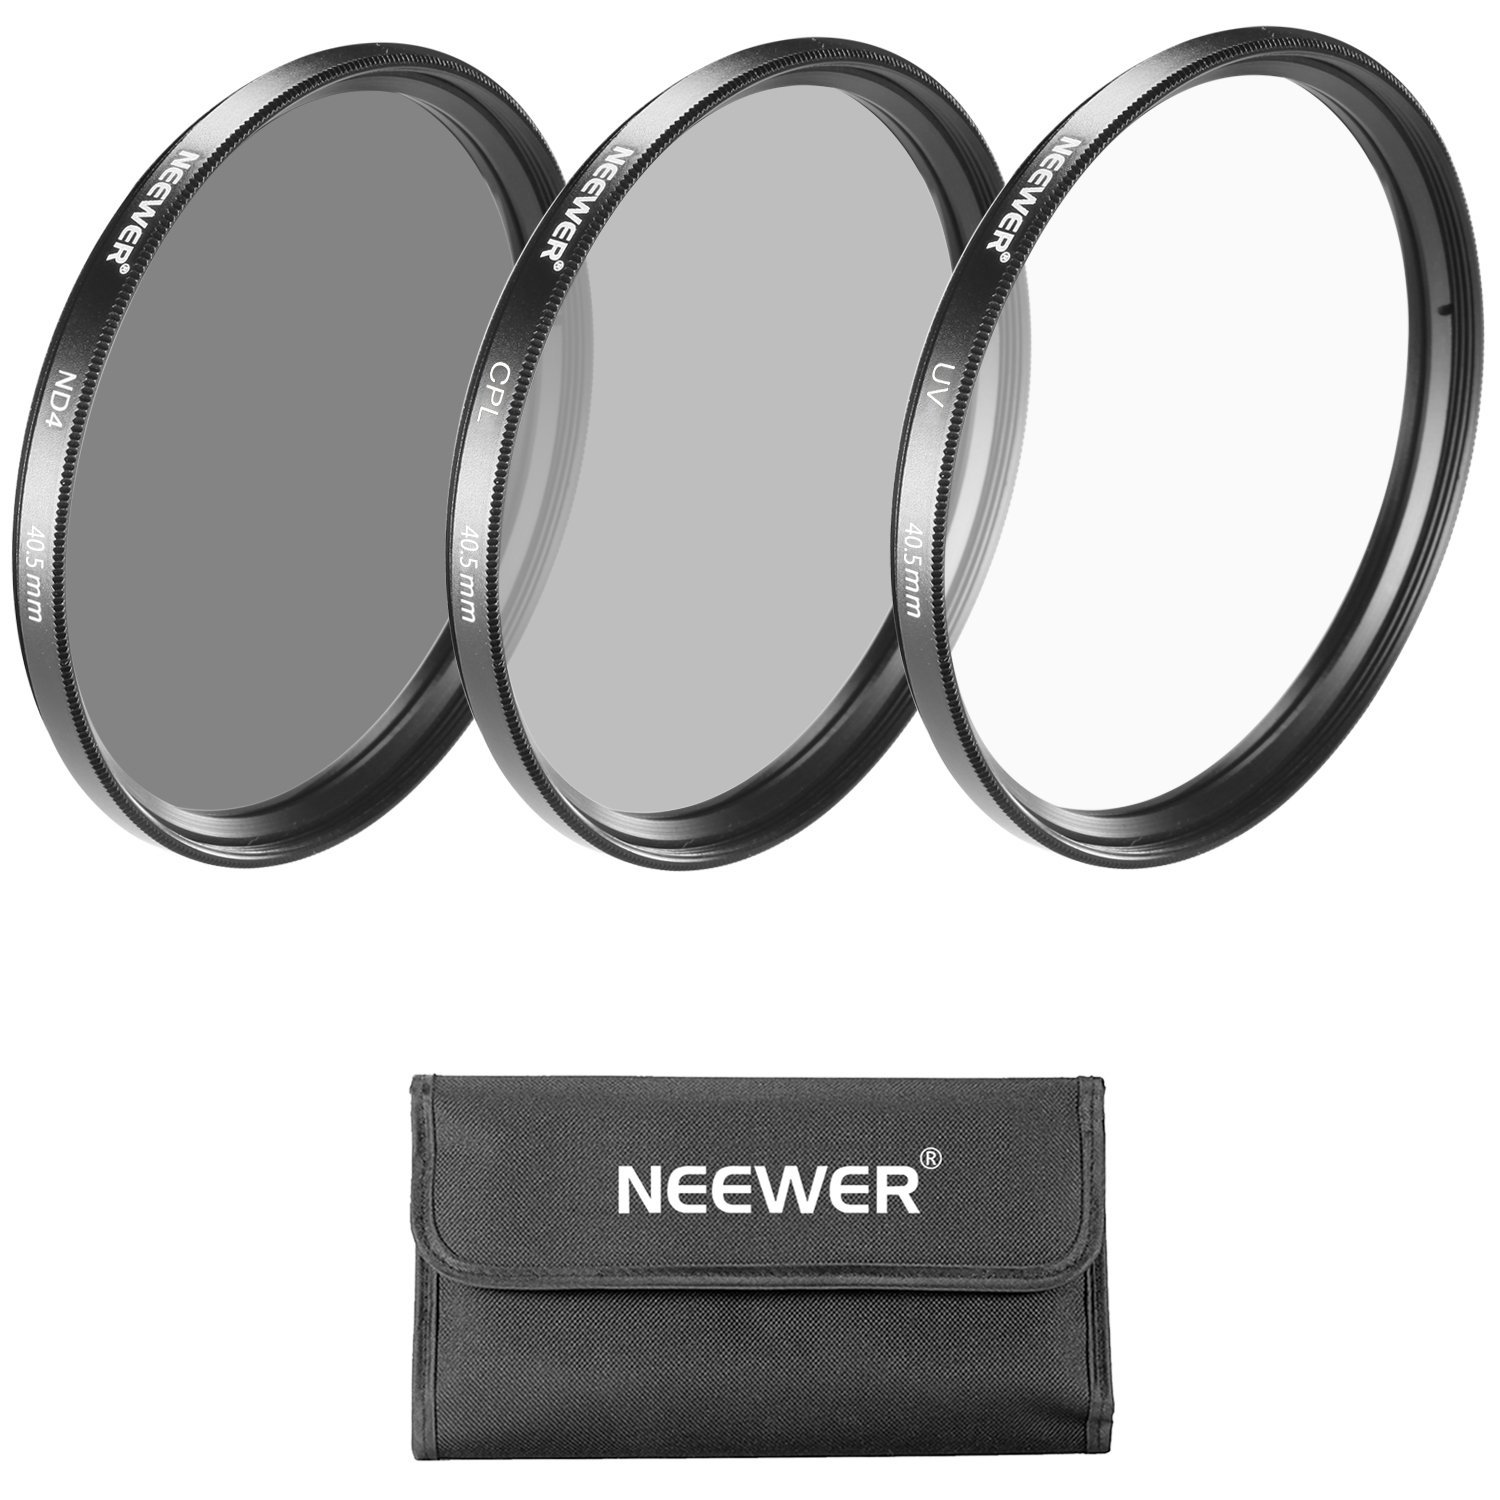 Neewer 40.5MM Lens Filter Kit(UV+CPL+ND4) with Filter Pouch for Sony A6000, NEX  - $26.99